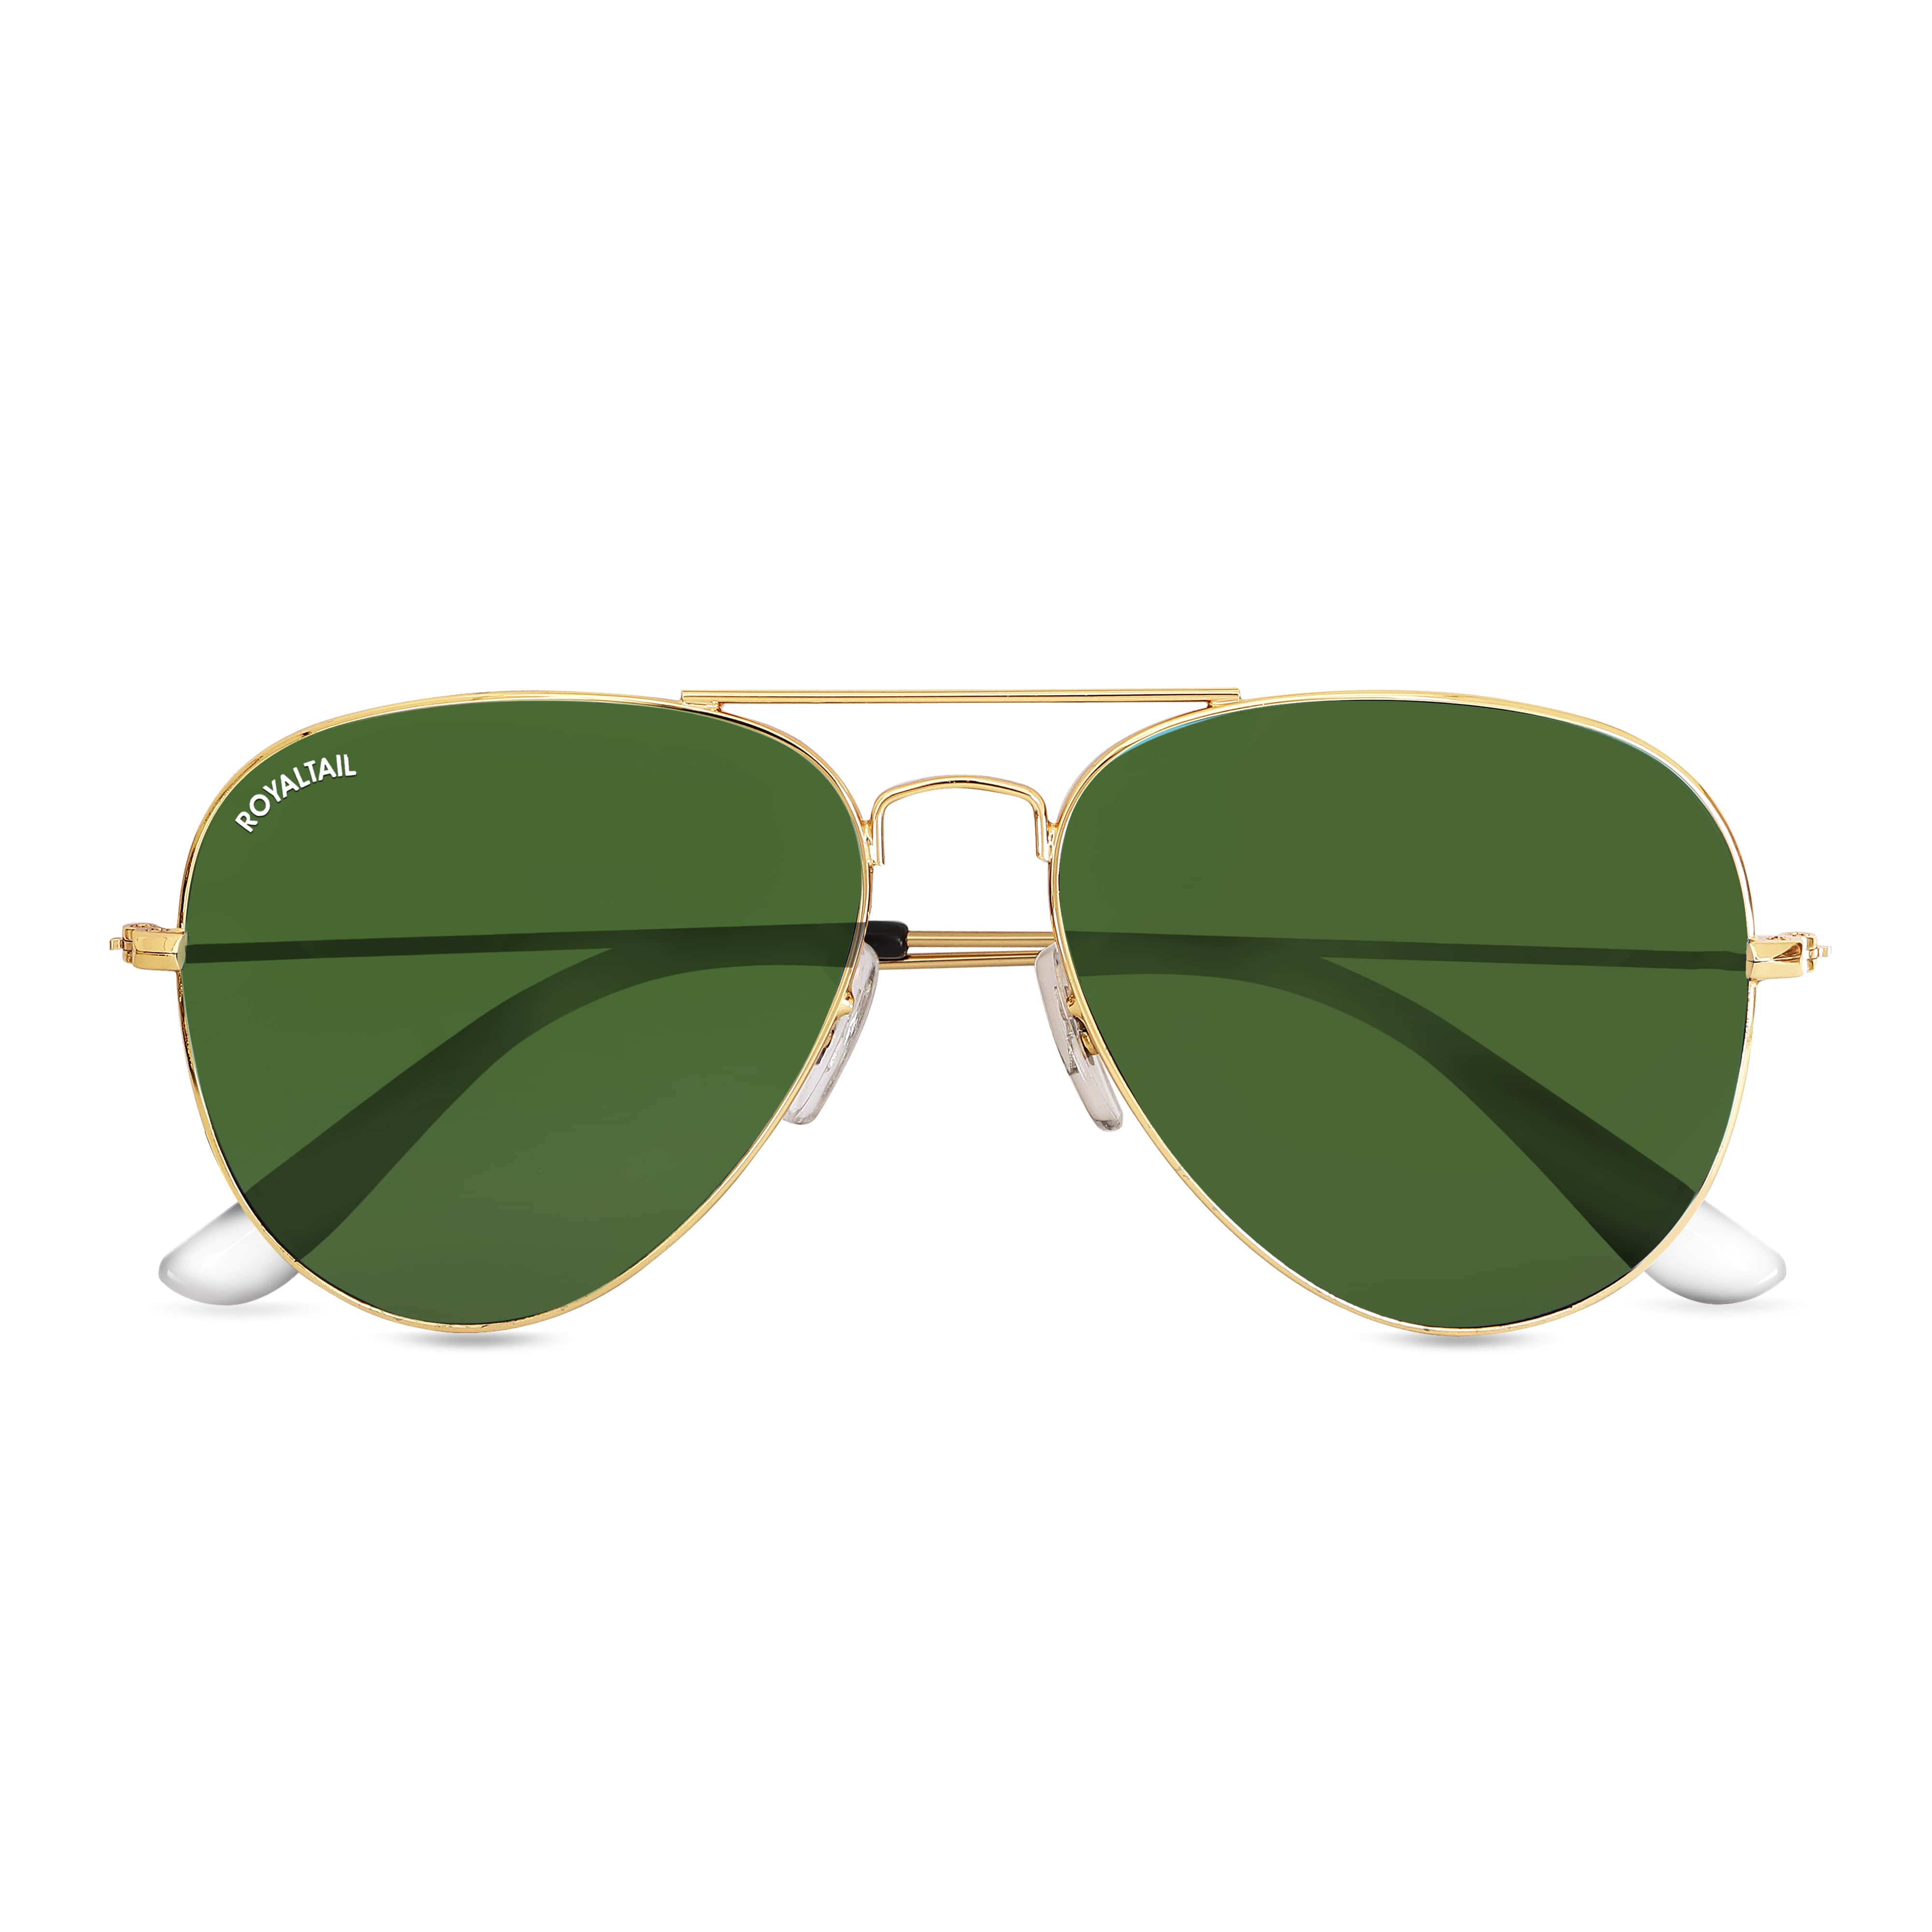 Ray Ban Green Tinted Round Sunglasses S35A5514 @ ₹6898